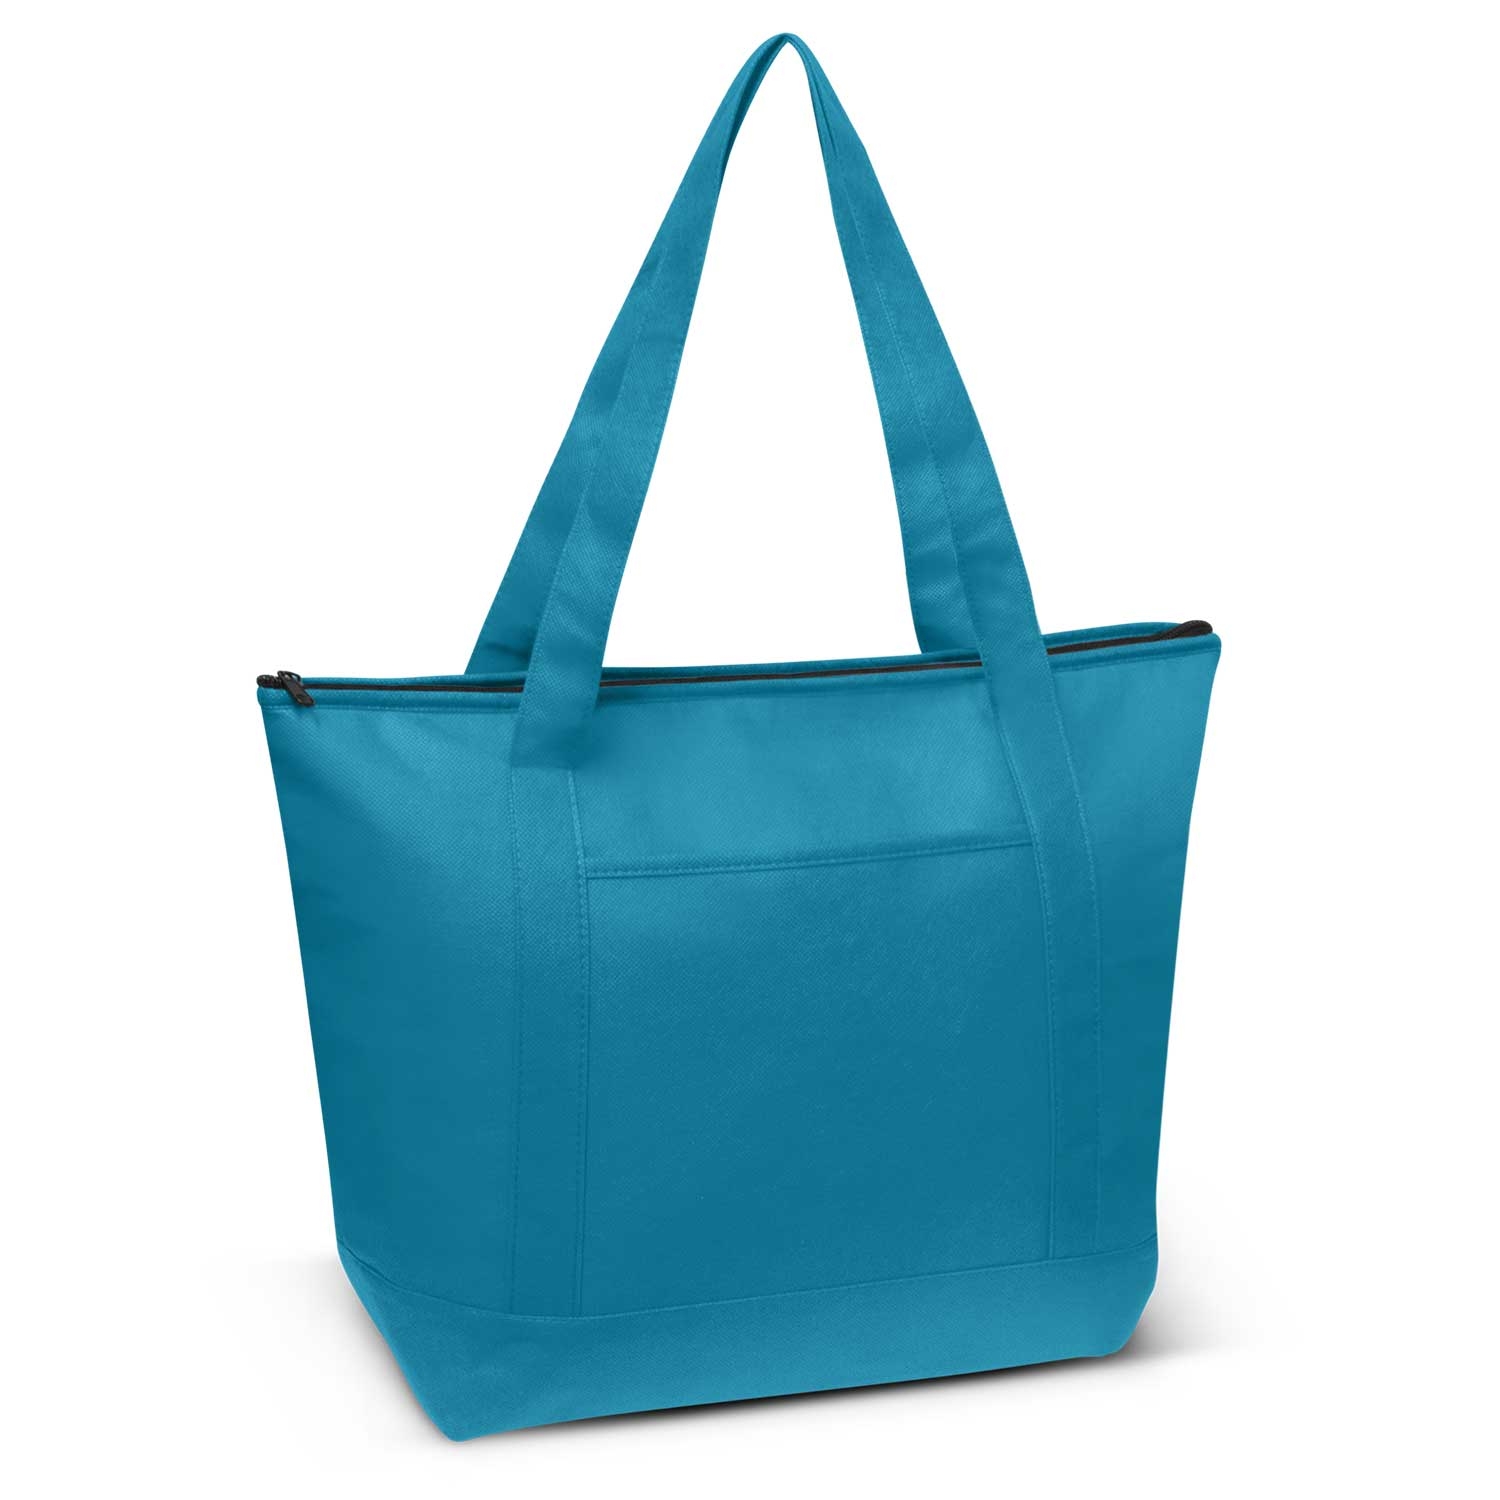 Fashion Promotion Beach Lunch Tote Cooler Bag (TP-CB333)